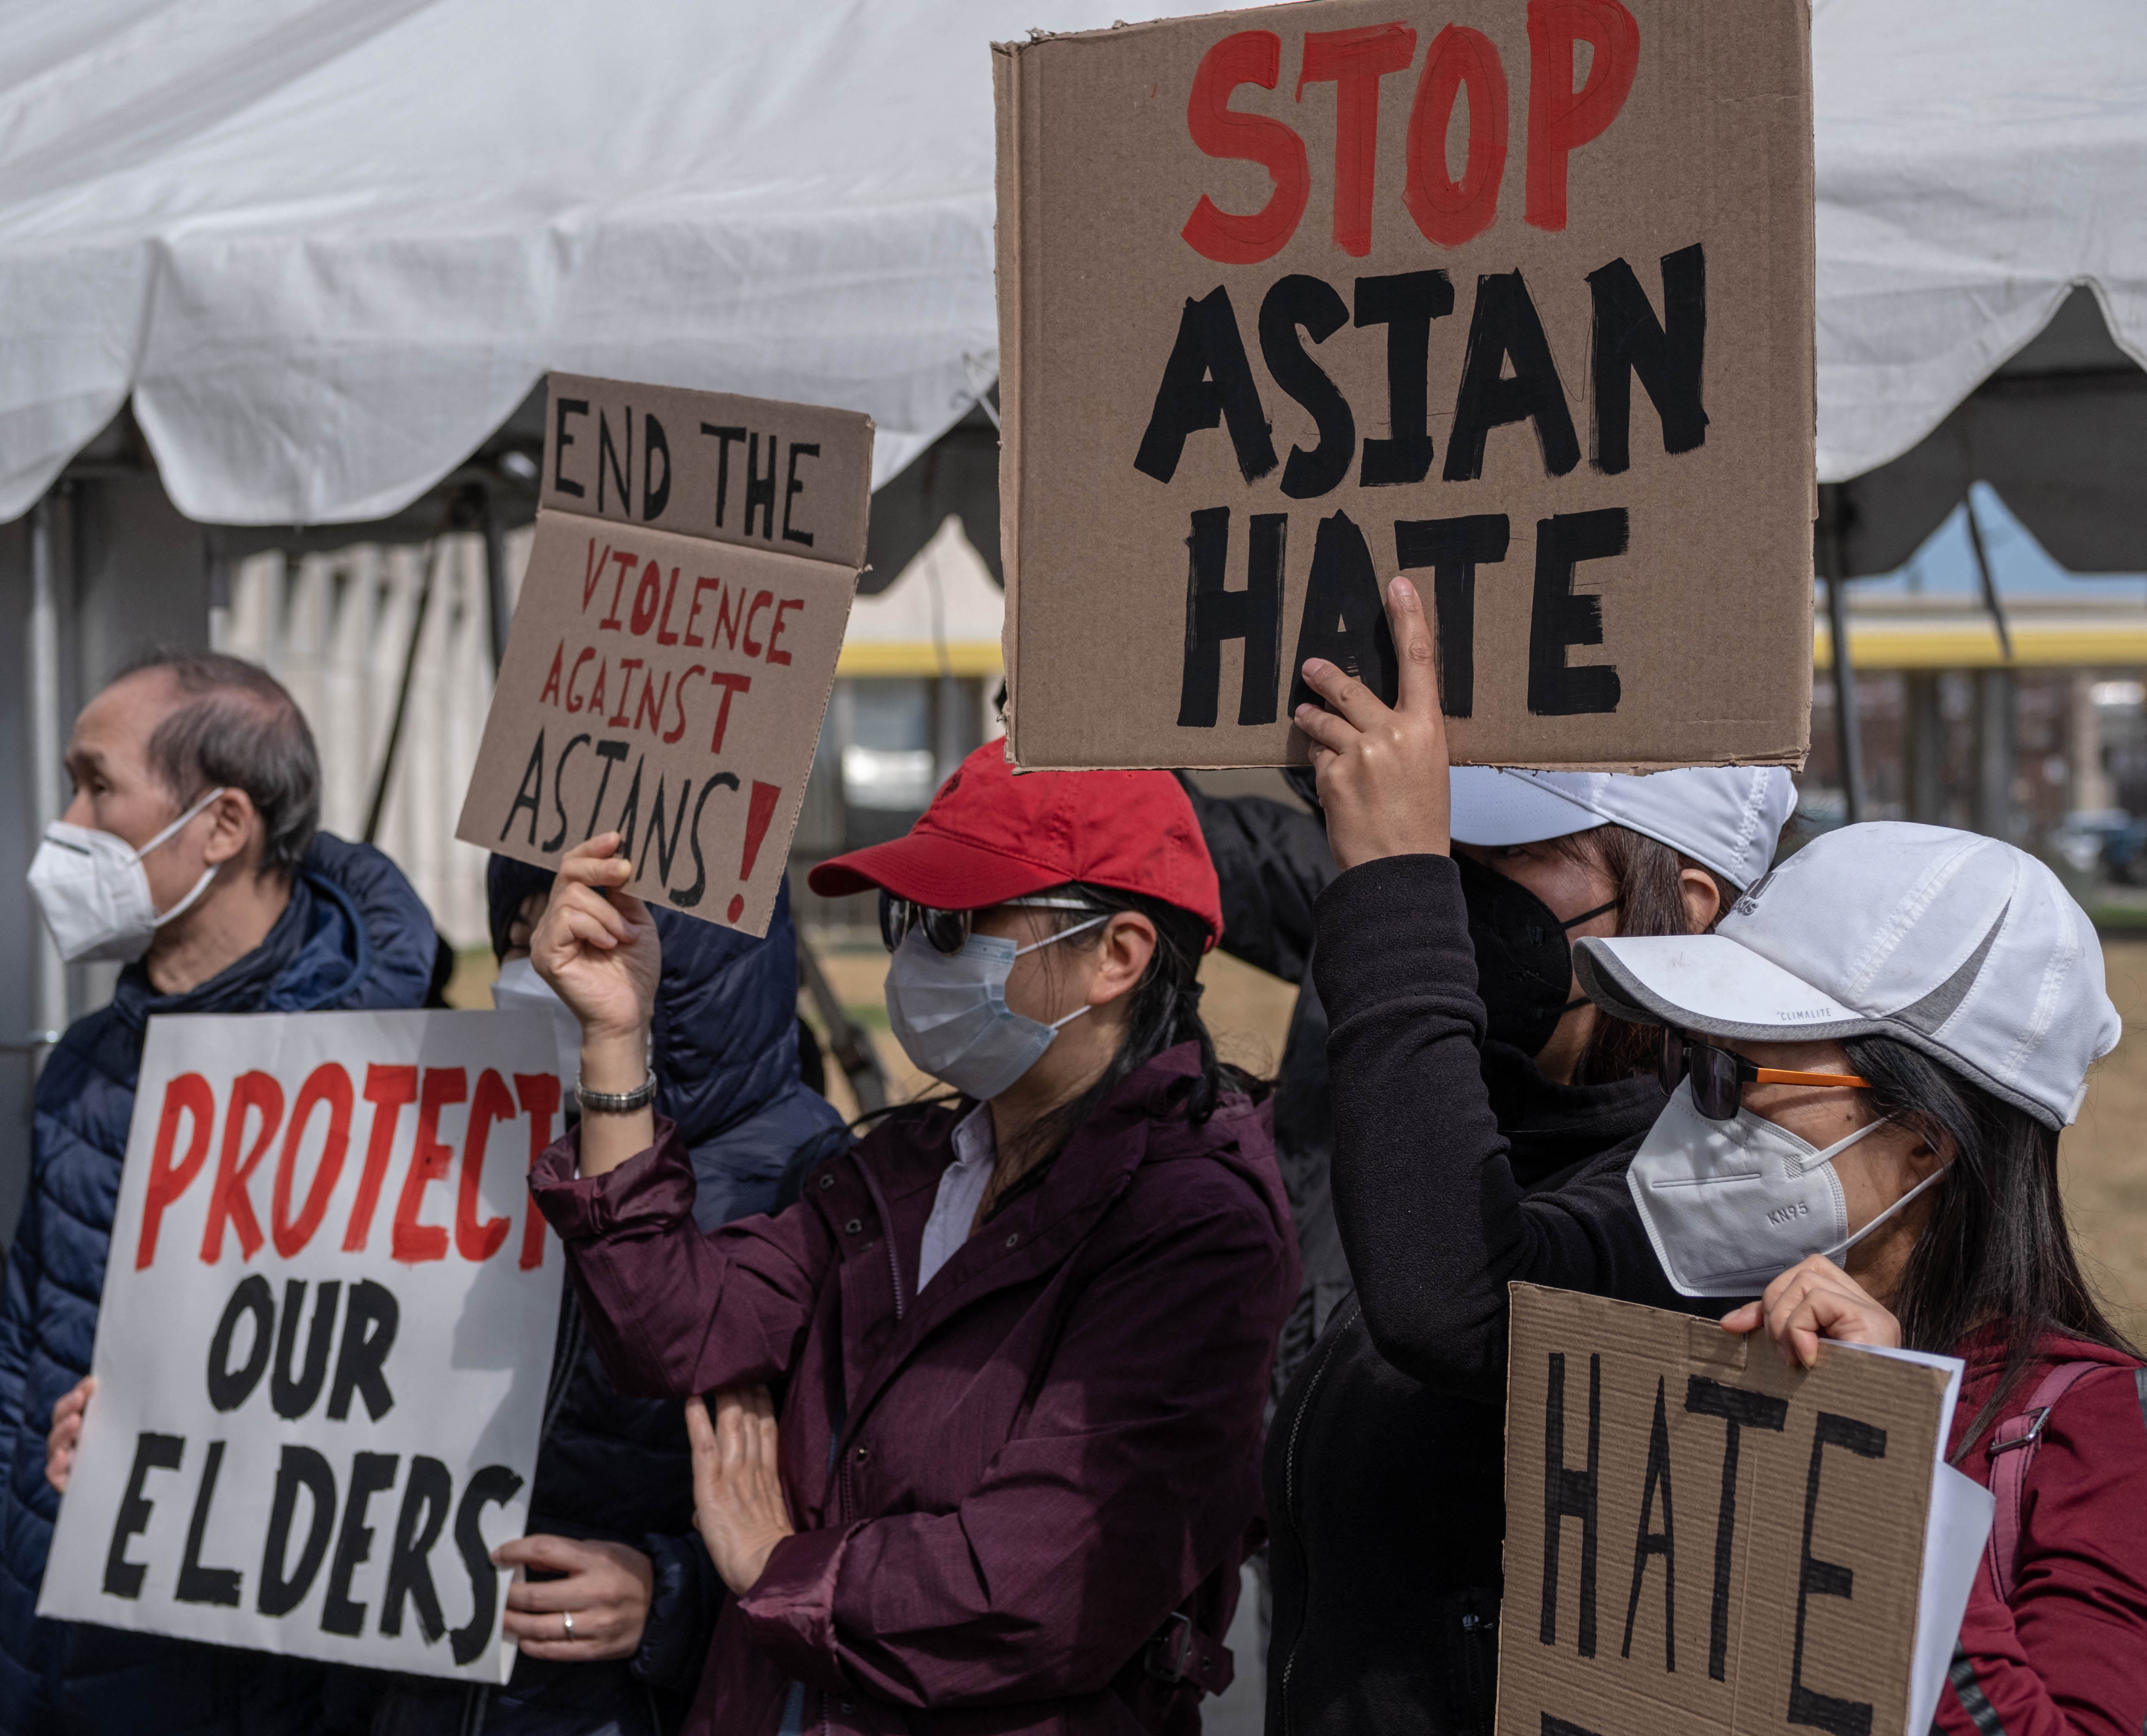 People march during a Stop Asian Hate rally in downtown Detroit, Michigan in March, as part of a nation wide protest in solidarity against hate crimes directed towards Asian Americans